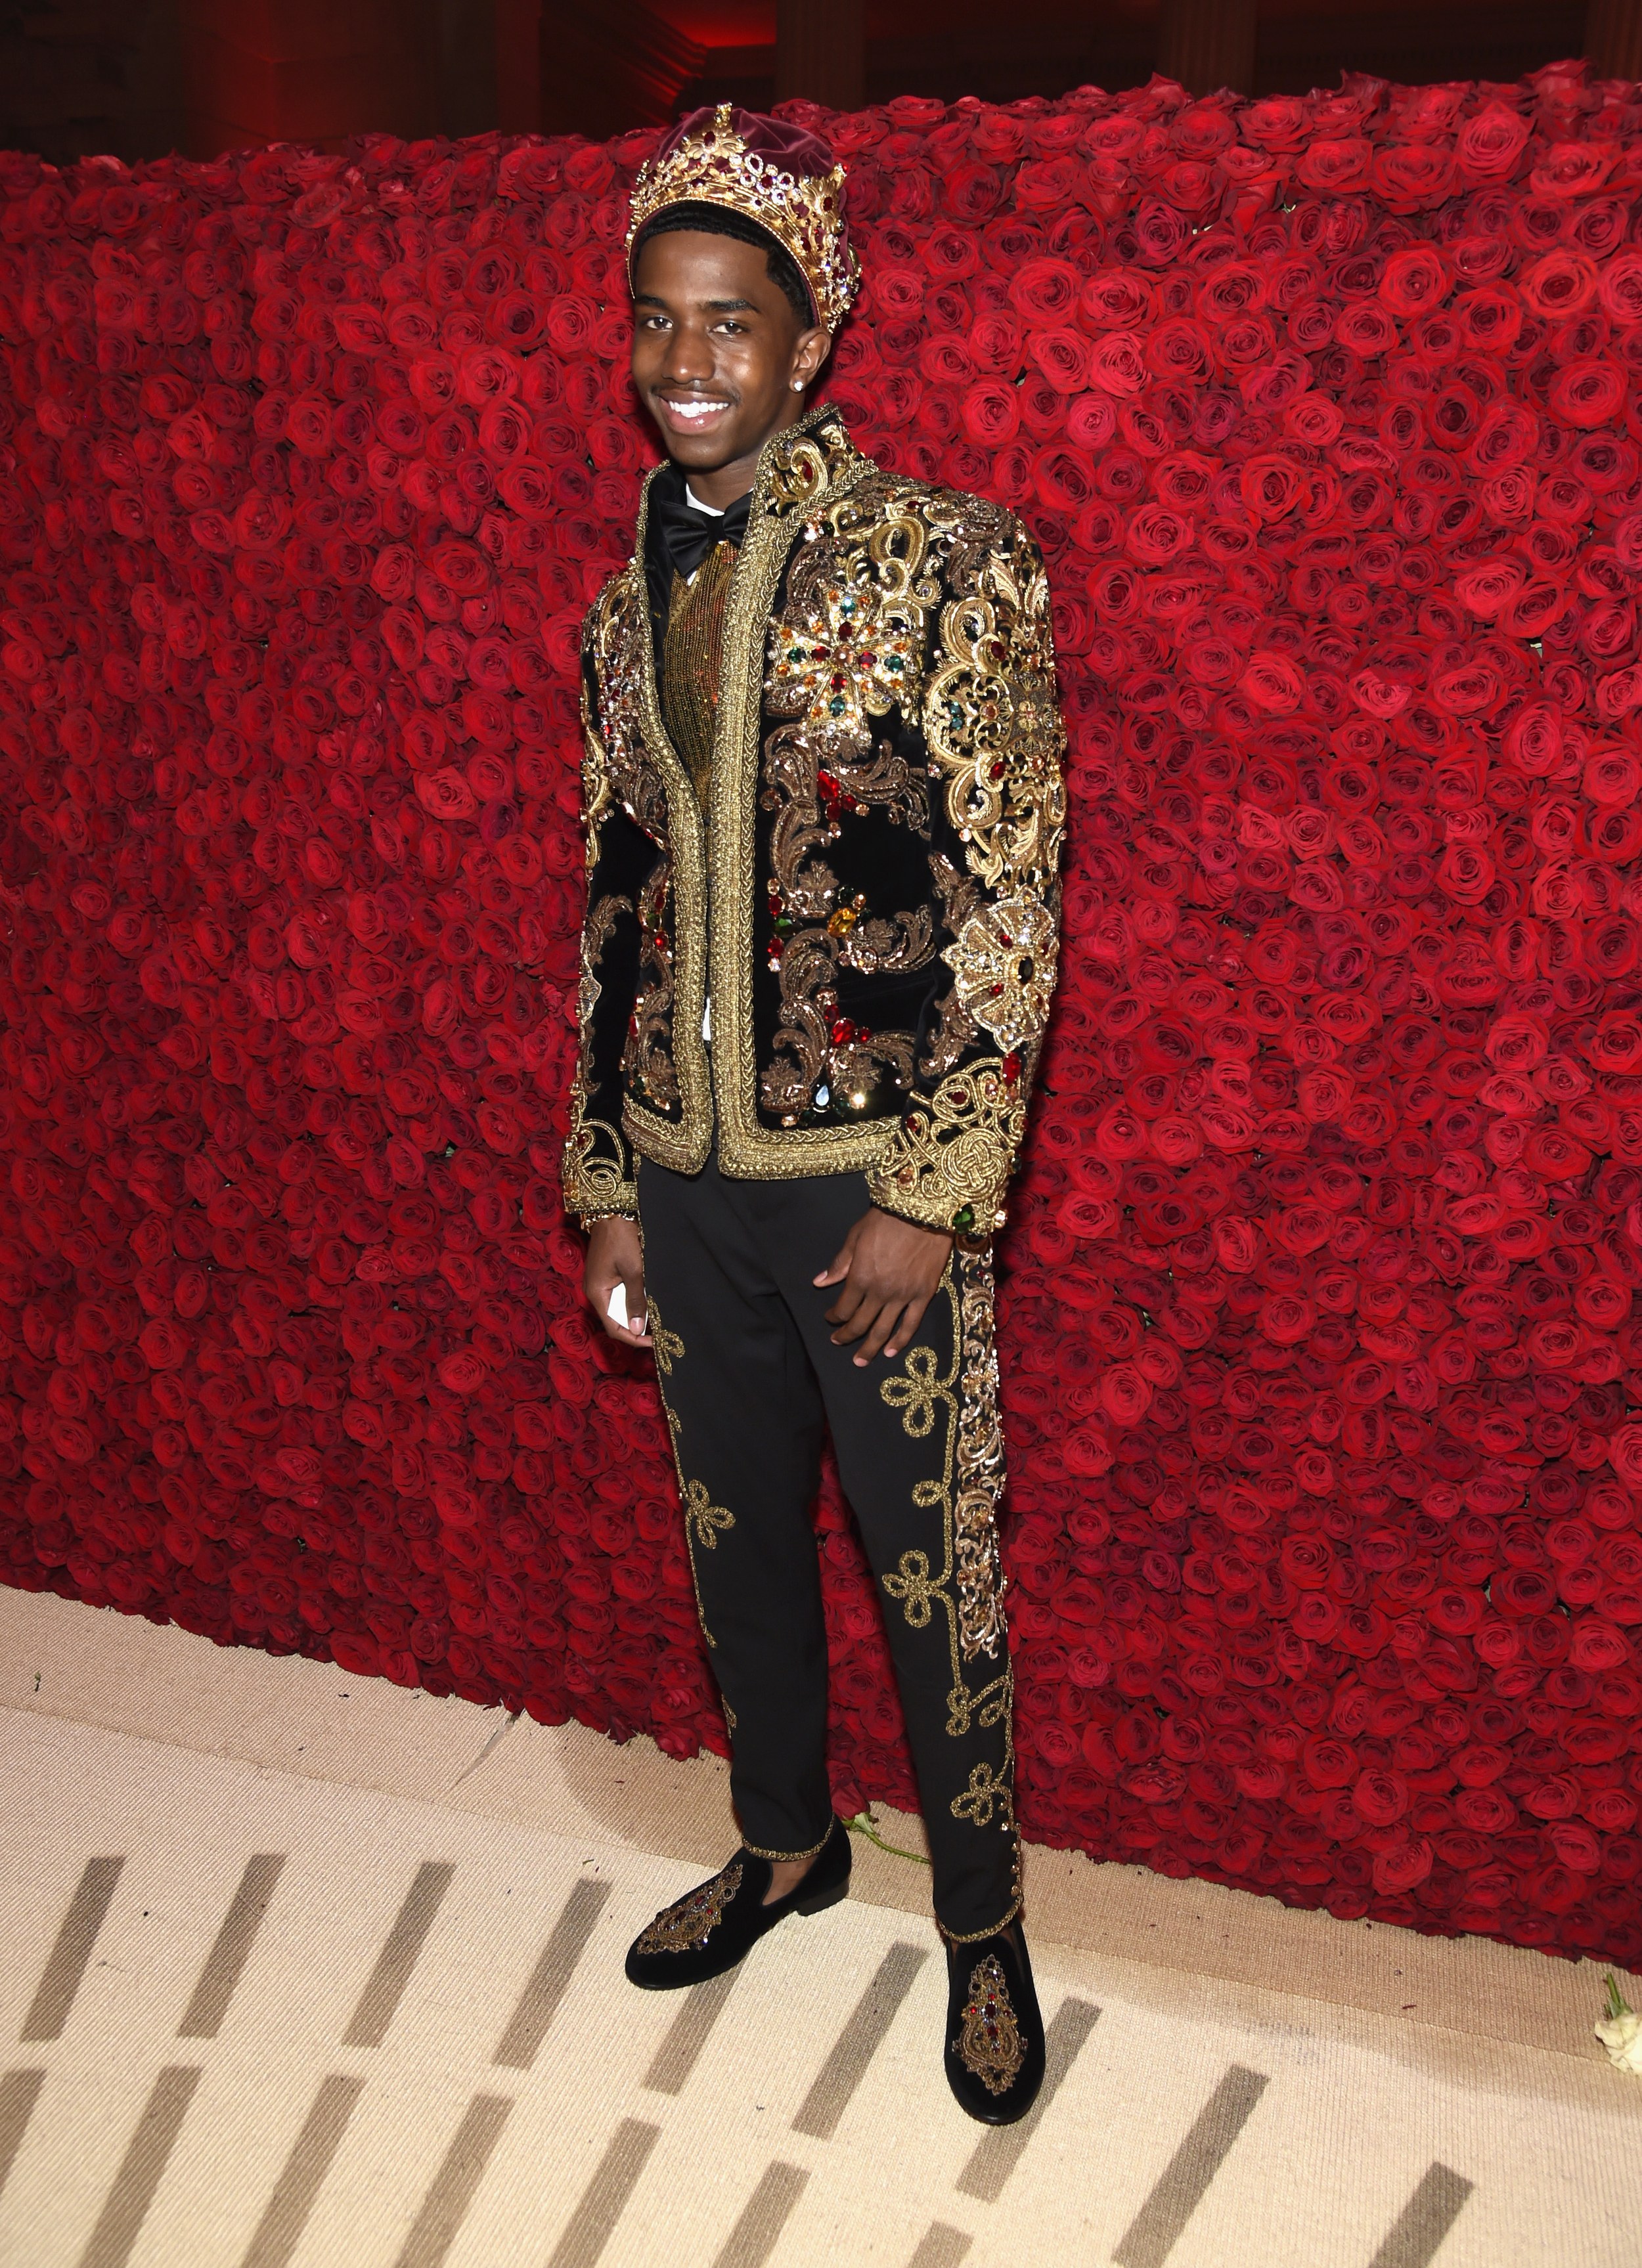 MG_Christian Combs in Dolce and Gabbana.jpg